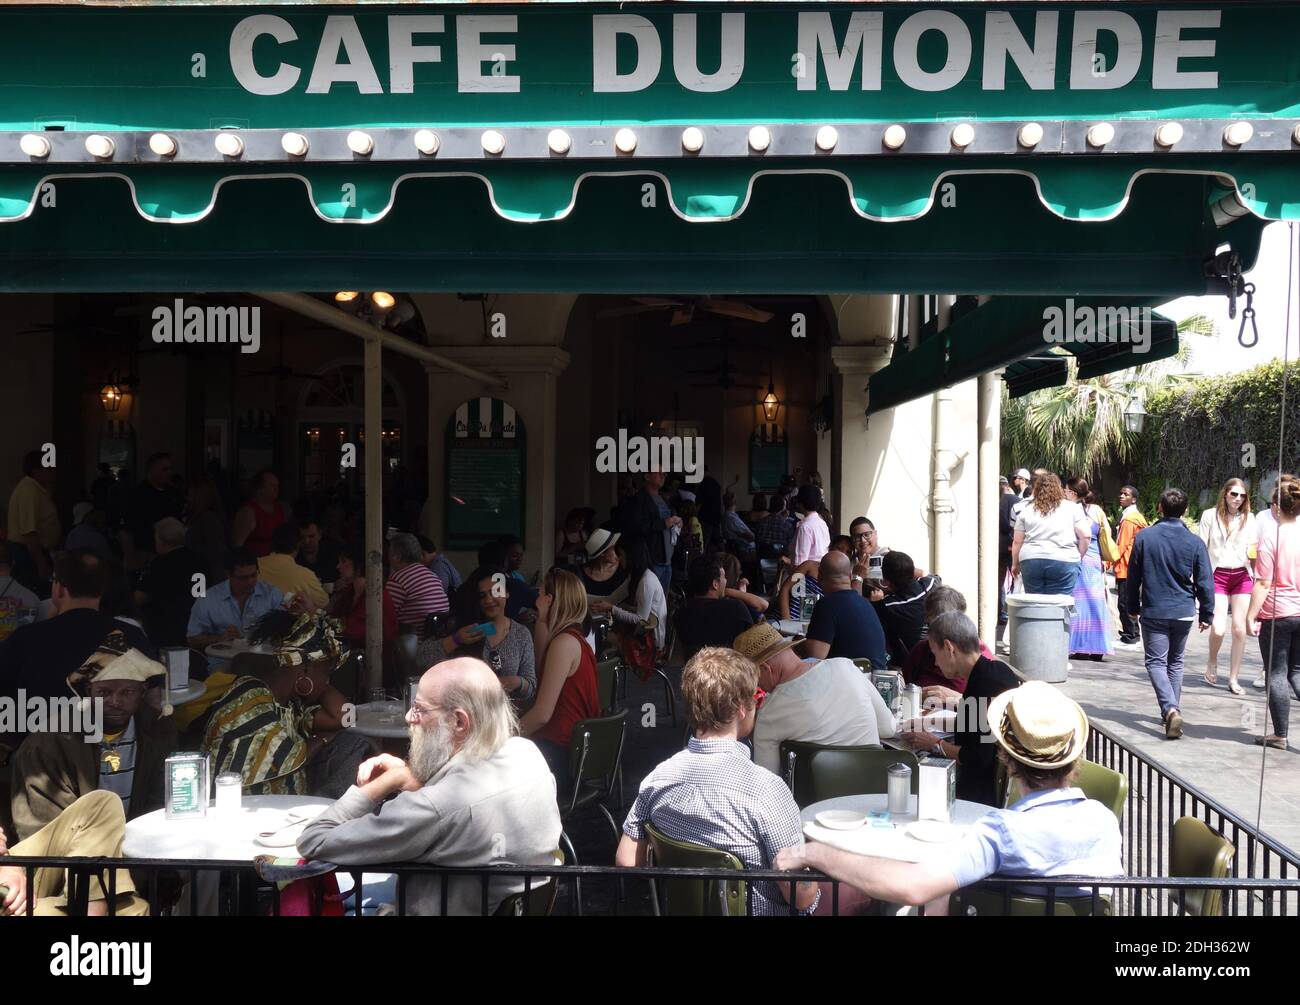 NEW ORLEANS,LA/USA -03-21-2014: People gathered at the famous Cafe Du Monde in New Orleans French Quarter Stock Photo